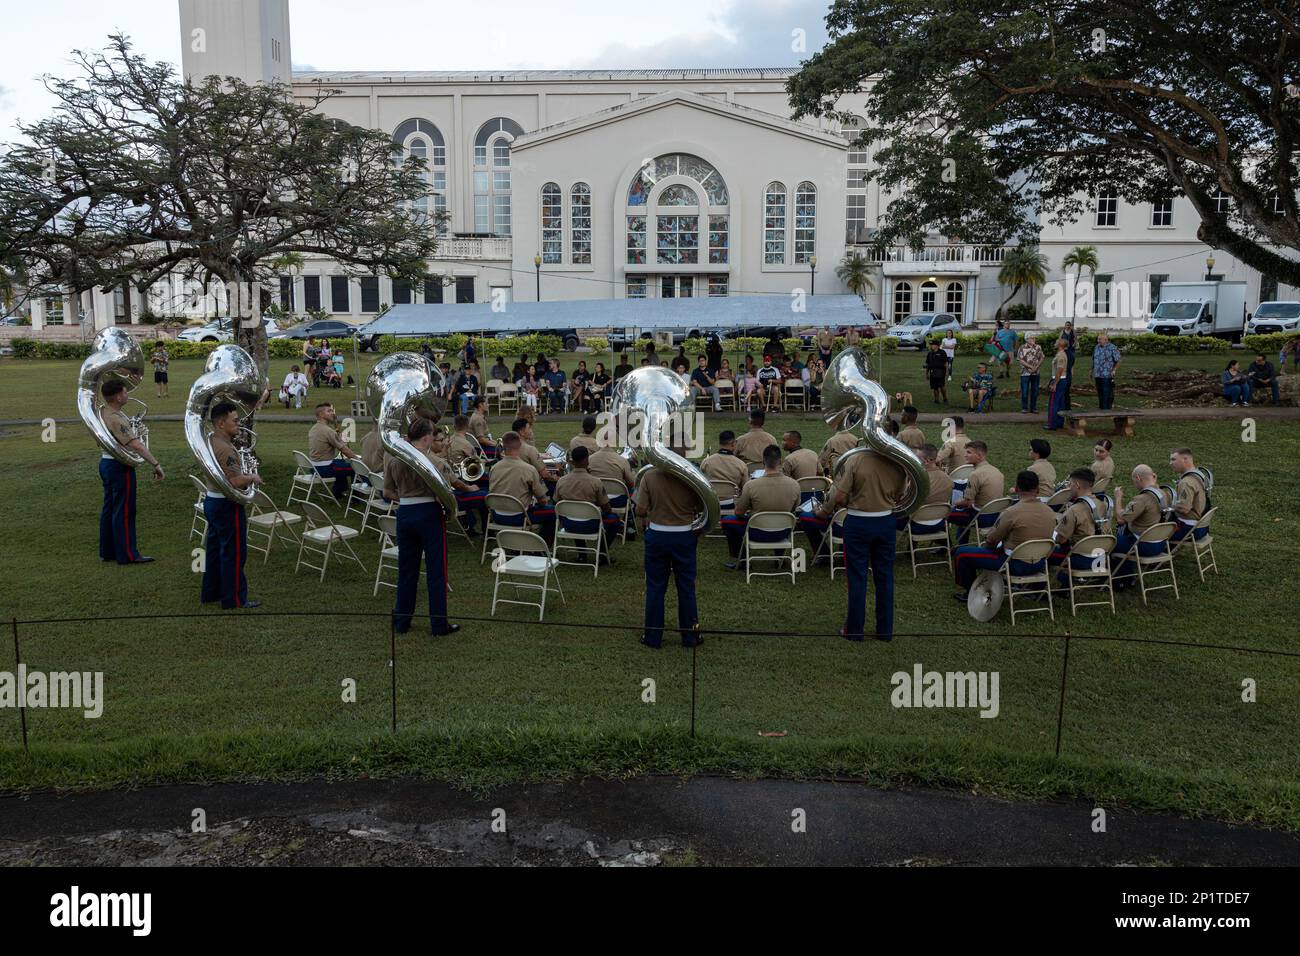 U.S. Marines with Marine Corps Forces Pacific Band perform for attendees during a live concert for the local community at Plaza de Espana, Hagatna, Guam, Jan. 23, 2023. The MARFORPAC Band participated in multiple community engagements during their visit to Guam as part of the Naval Support Activity, Marine Corps Base Camp Blaz Reactivation and Naming Ceremony. In order to encourage music education and showcase the vibrant history and tradition of military music, the band is active in providing clinics and concerts for the communities they serve. The MARFORPAC Band performs throughout the Indo- Stock Photo